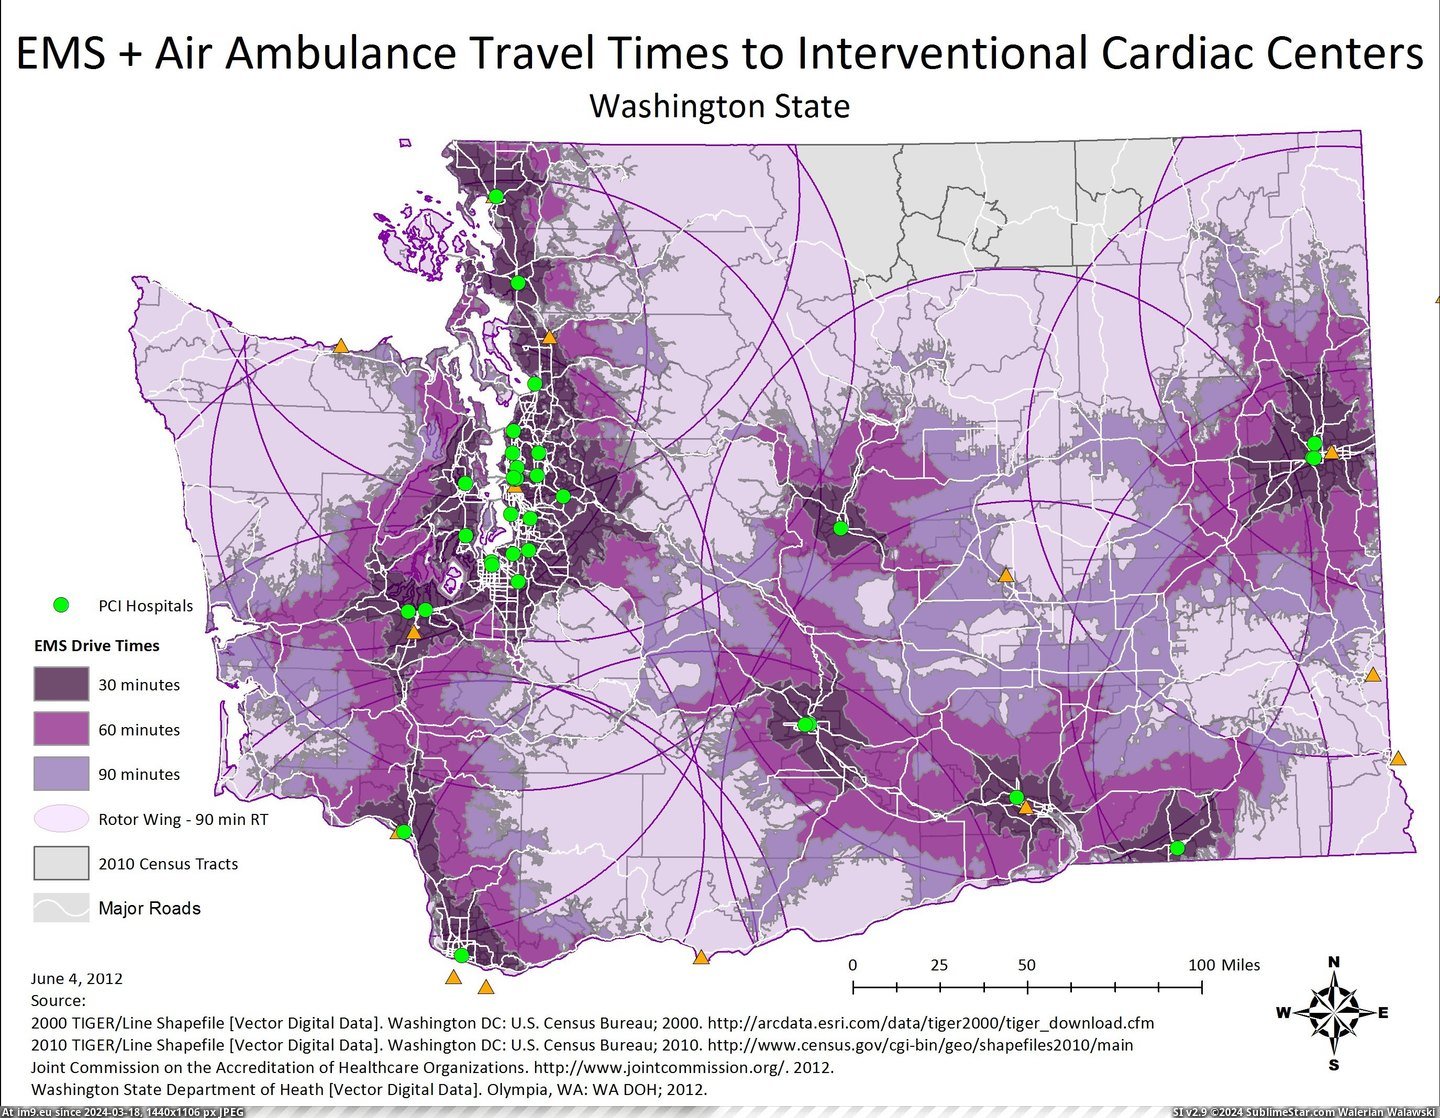 #State #Washington #Cardiac #Access #Services [Mapporn] Access to Interventional Cardiac Services in Washington State [2750x2125] [OS] Pic. (Image of album My r/MAPS favs))